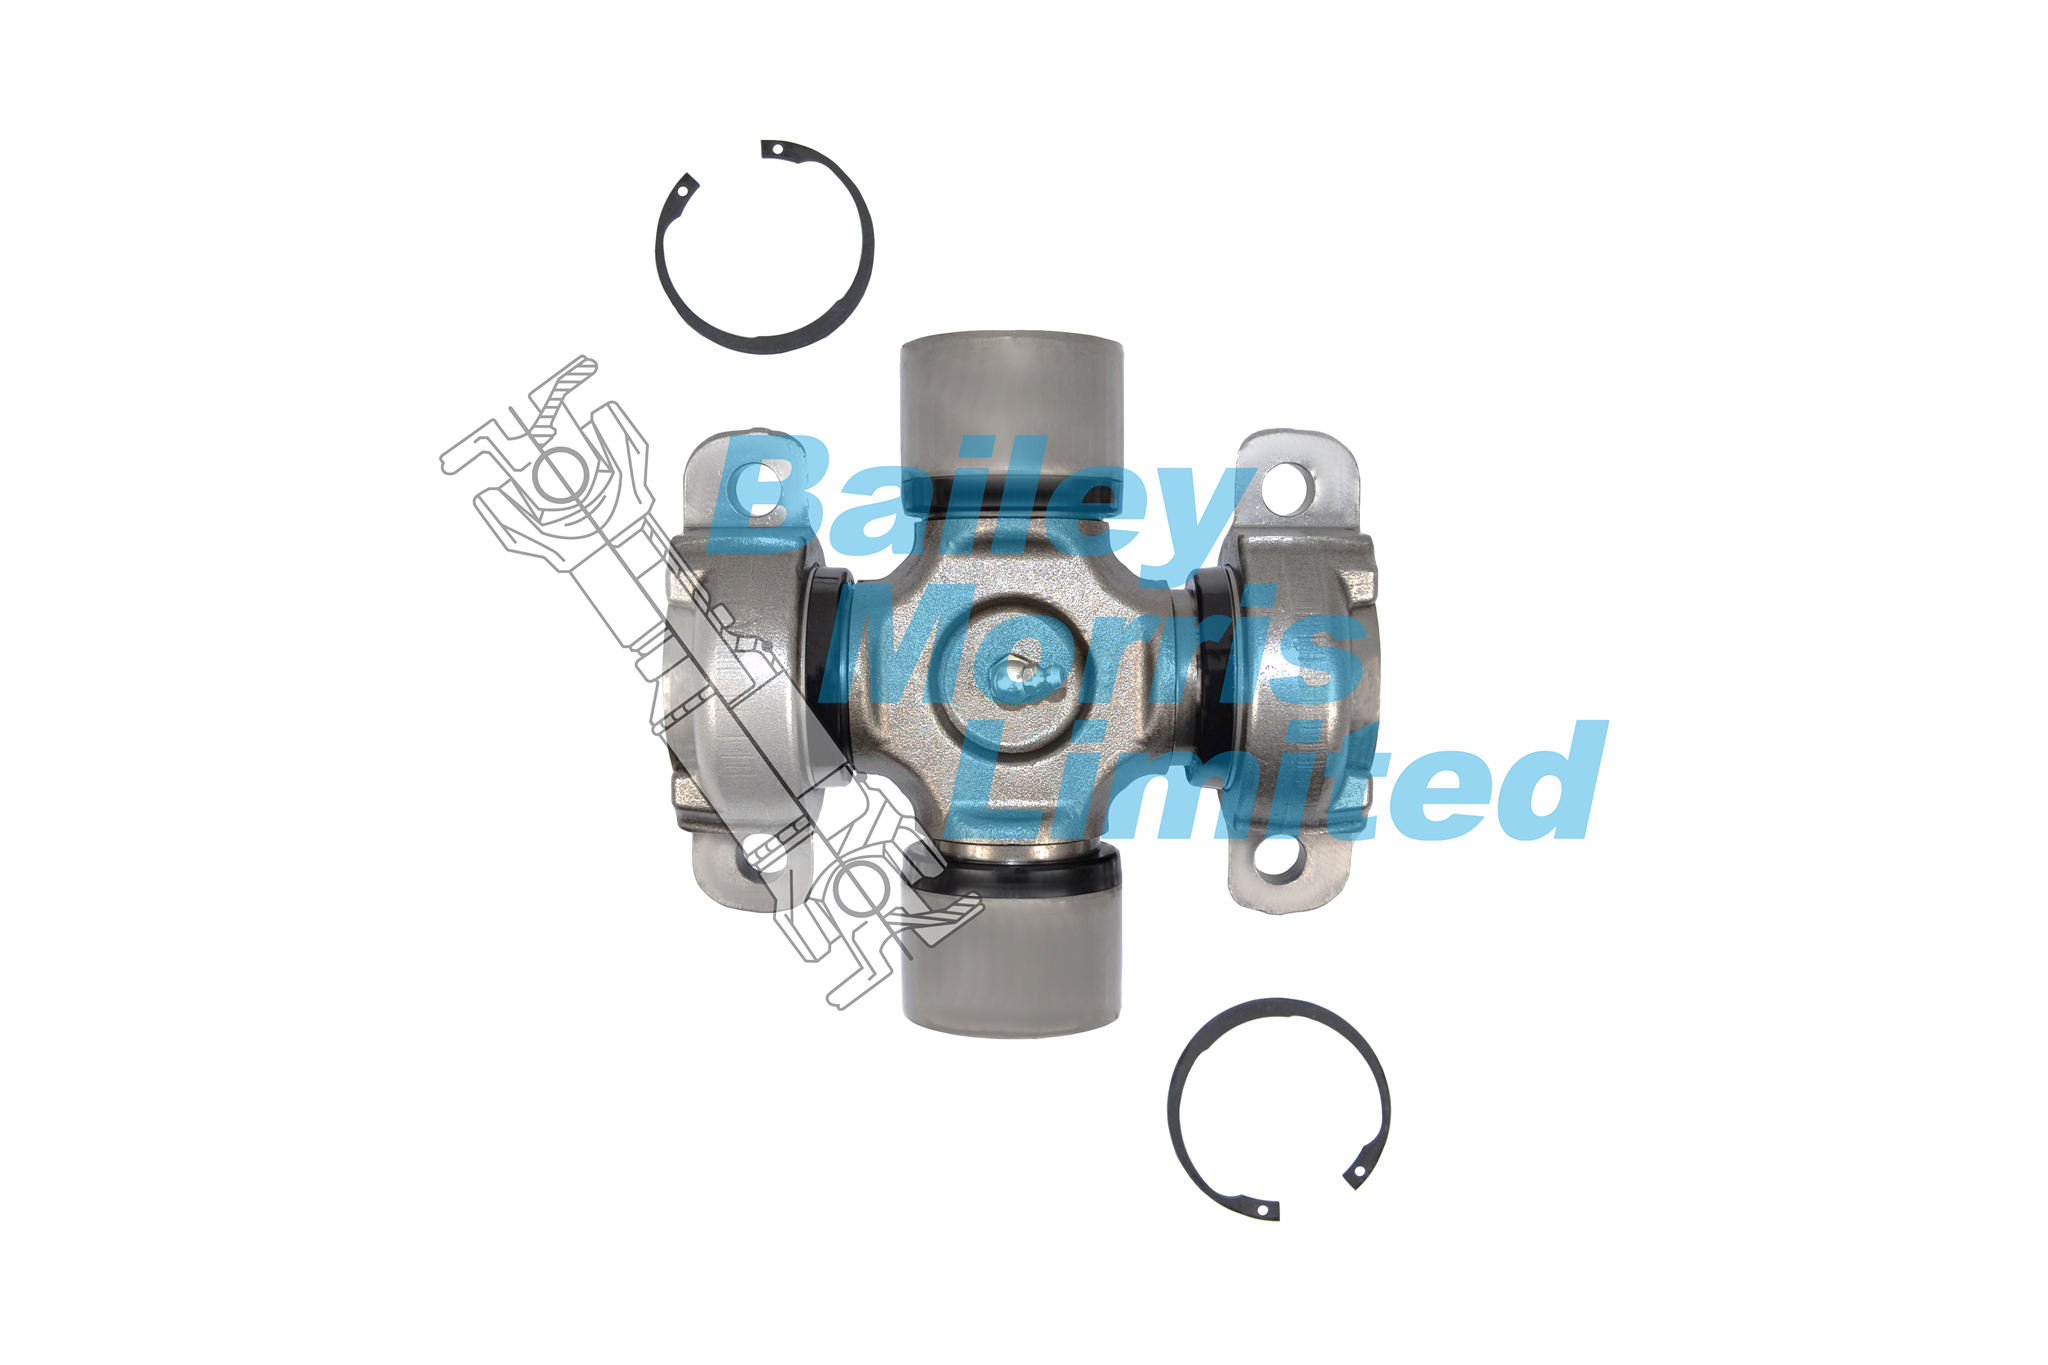 Picture of Universal Joint 57X164MM P500 Scania 390225